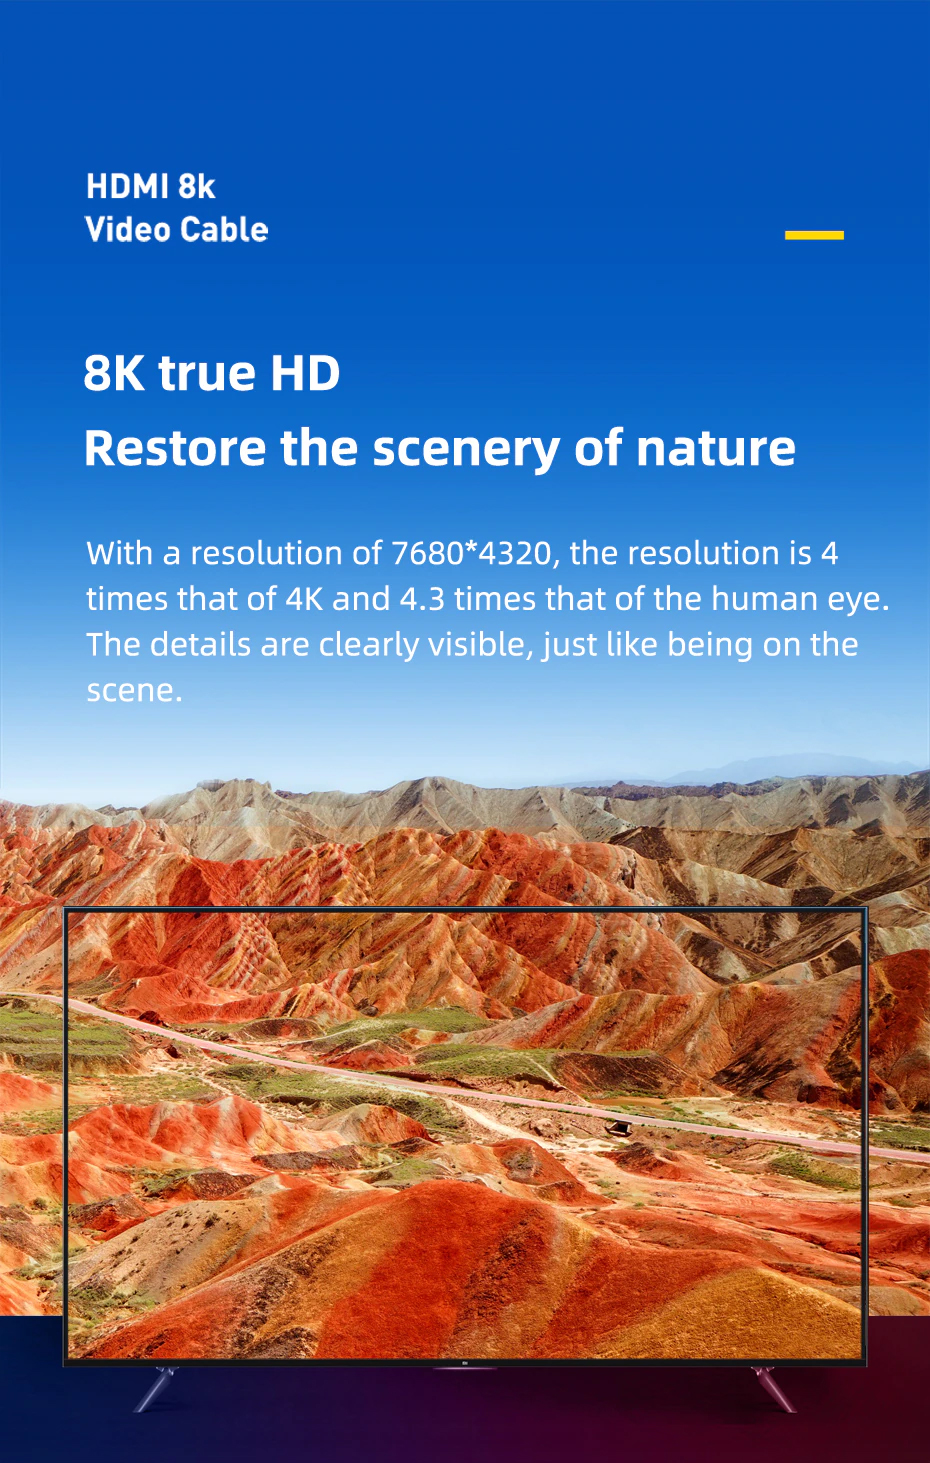 With a resolution of 7680*4320, the resolution is 4 times that of 4K and 4.3 times that of the human eye. The details are clearly visible, just like being on the scene.